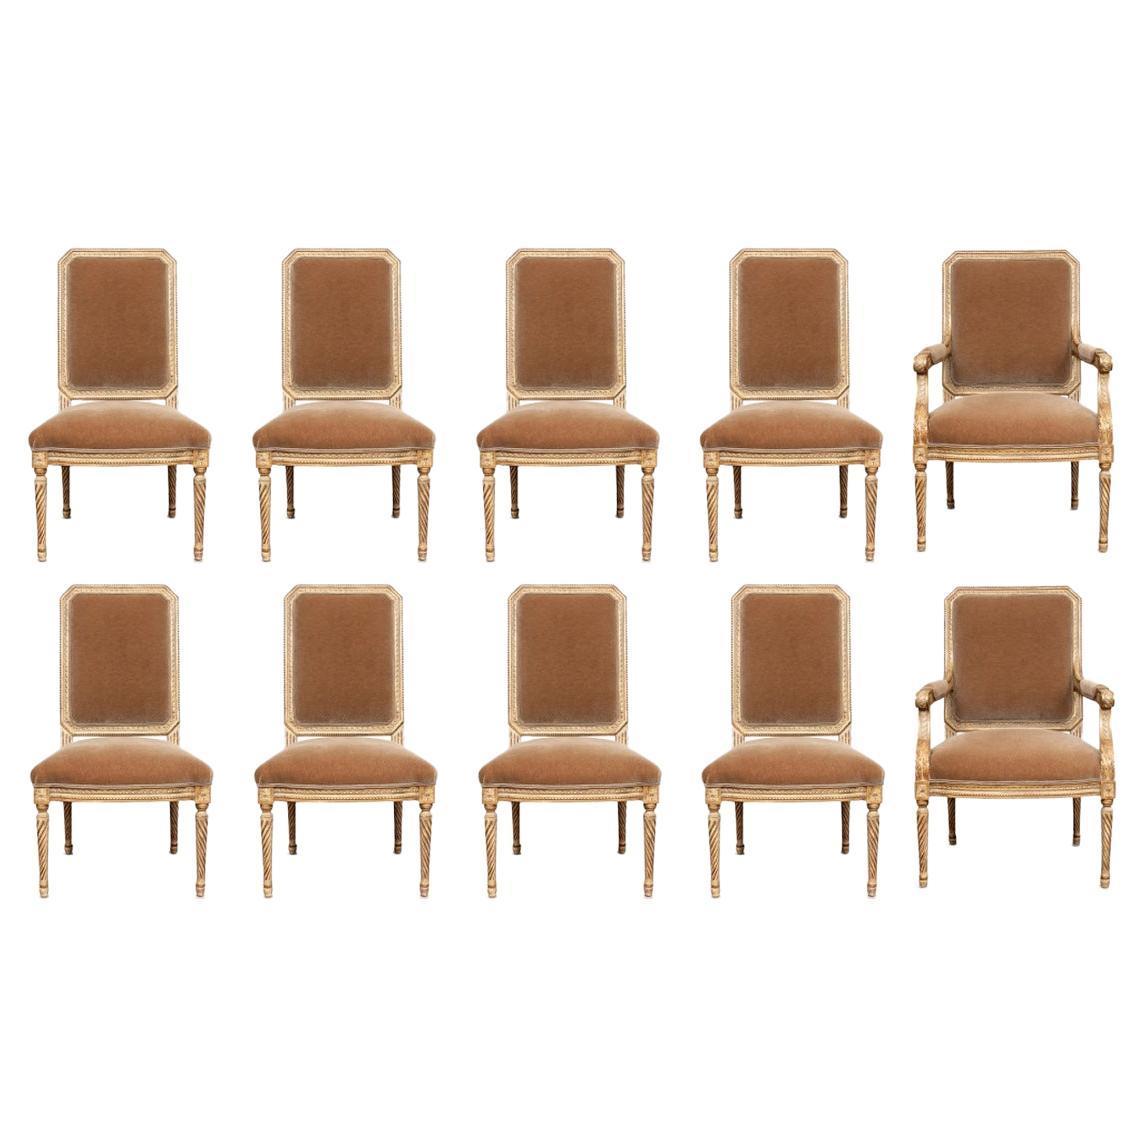 Collection of ten fine quality upholstered and carved dining chairs featuring chamfered top rail with carved frame with gilt accents on turned fluted tapered round legs. Upholstered in mohair. Collection includes two arm chairs and eight side